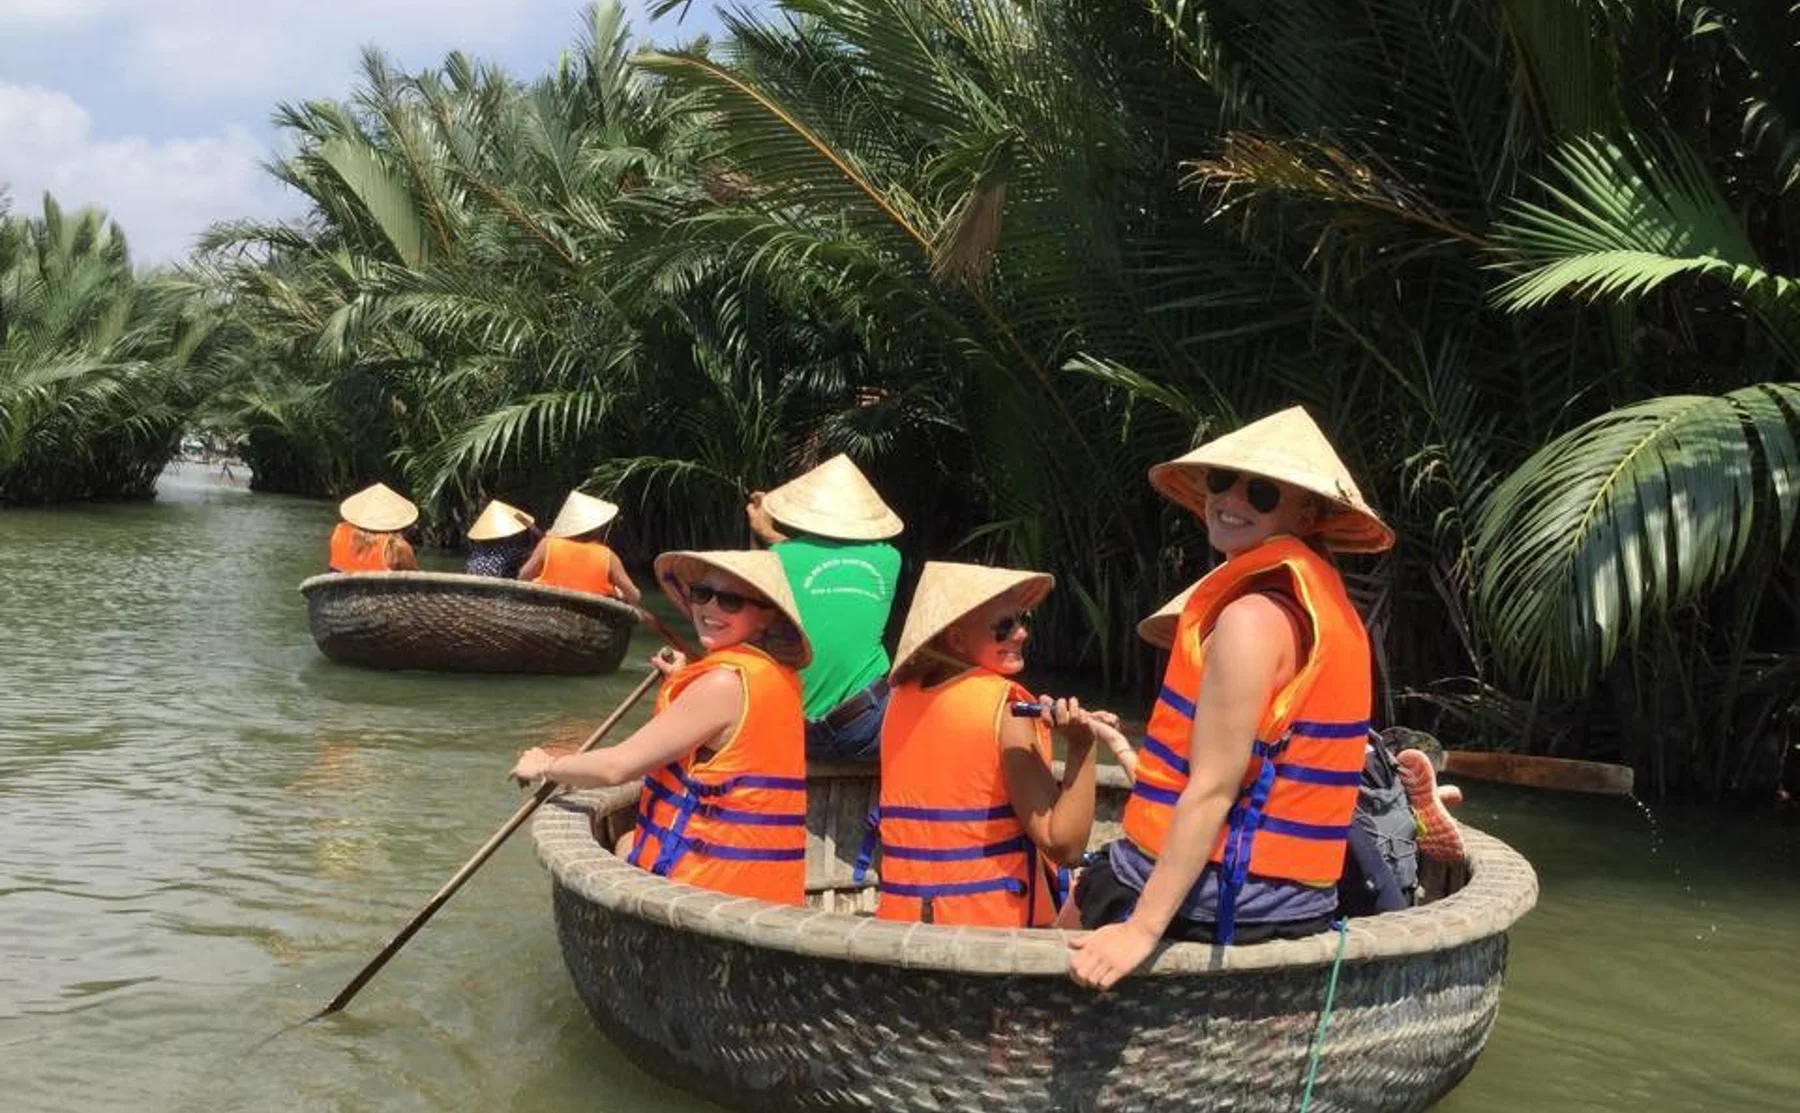 Tour The Markets Of Hoi An And Take A Cooking Class After - 1157264